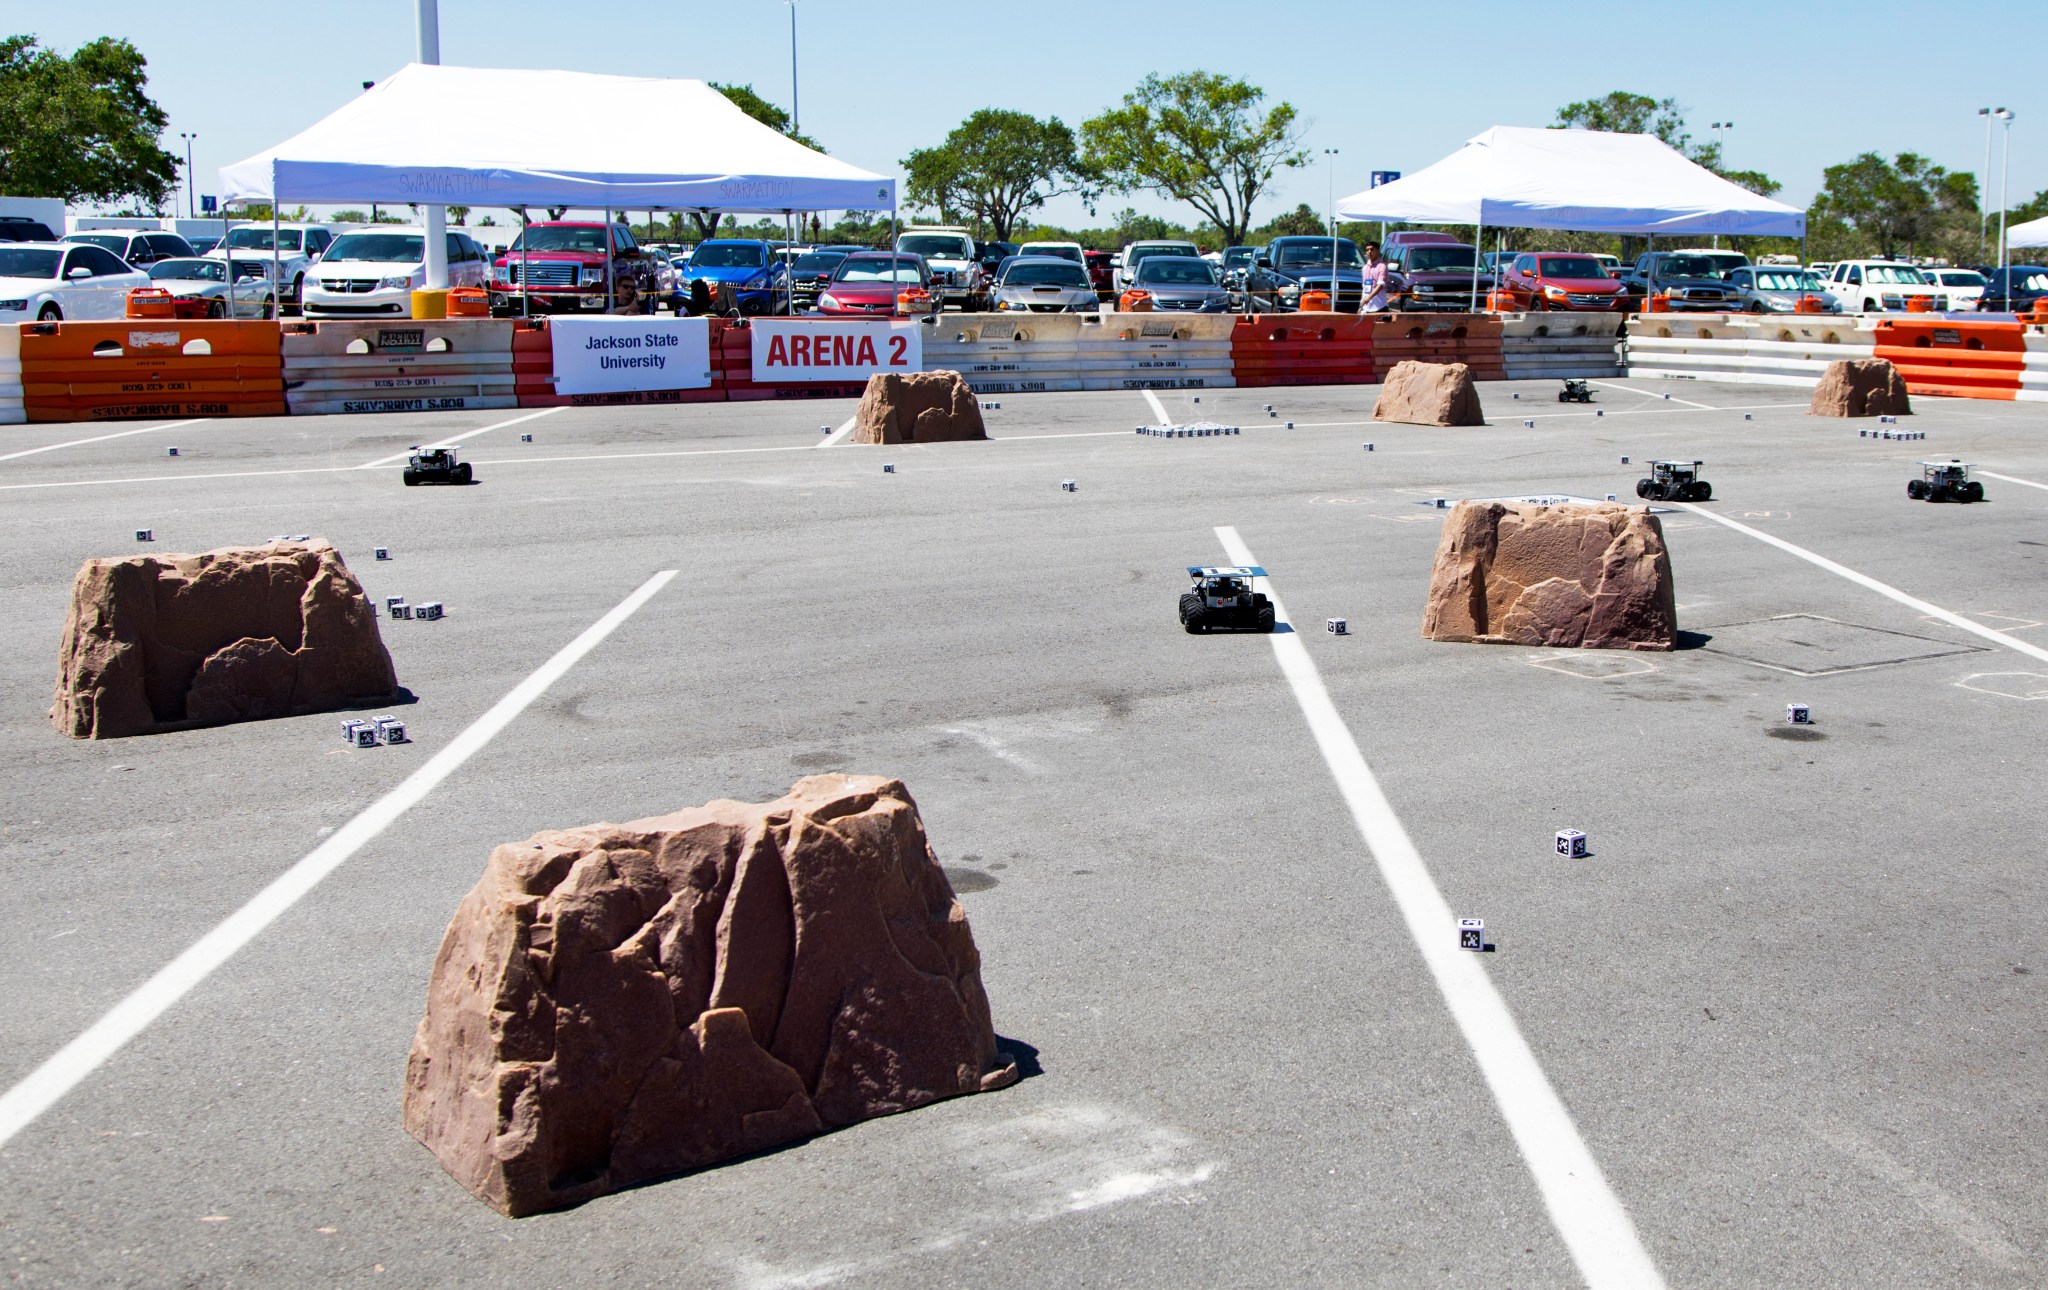 Simulated rocks form obstacles for Swarmathon challenge